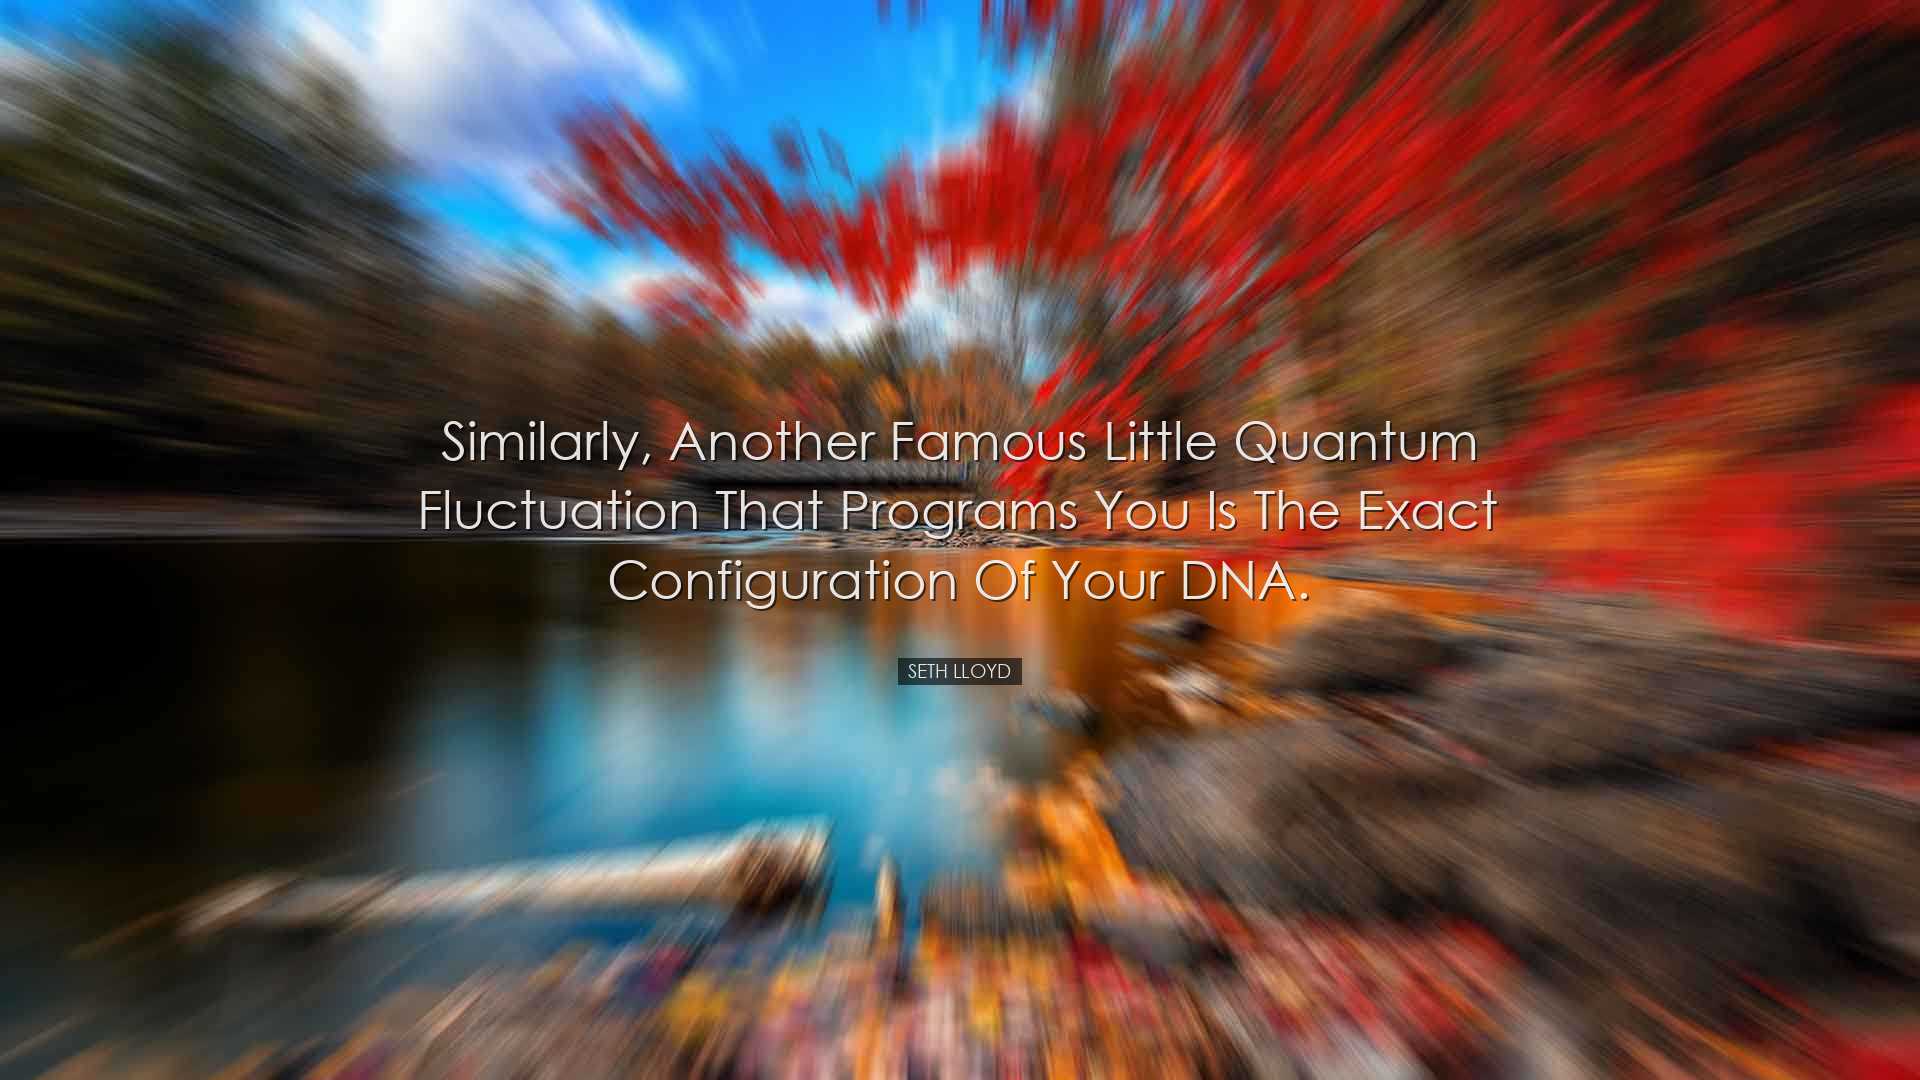 Similarly, another famous little quantum fluctuation that programs